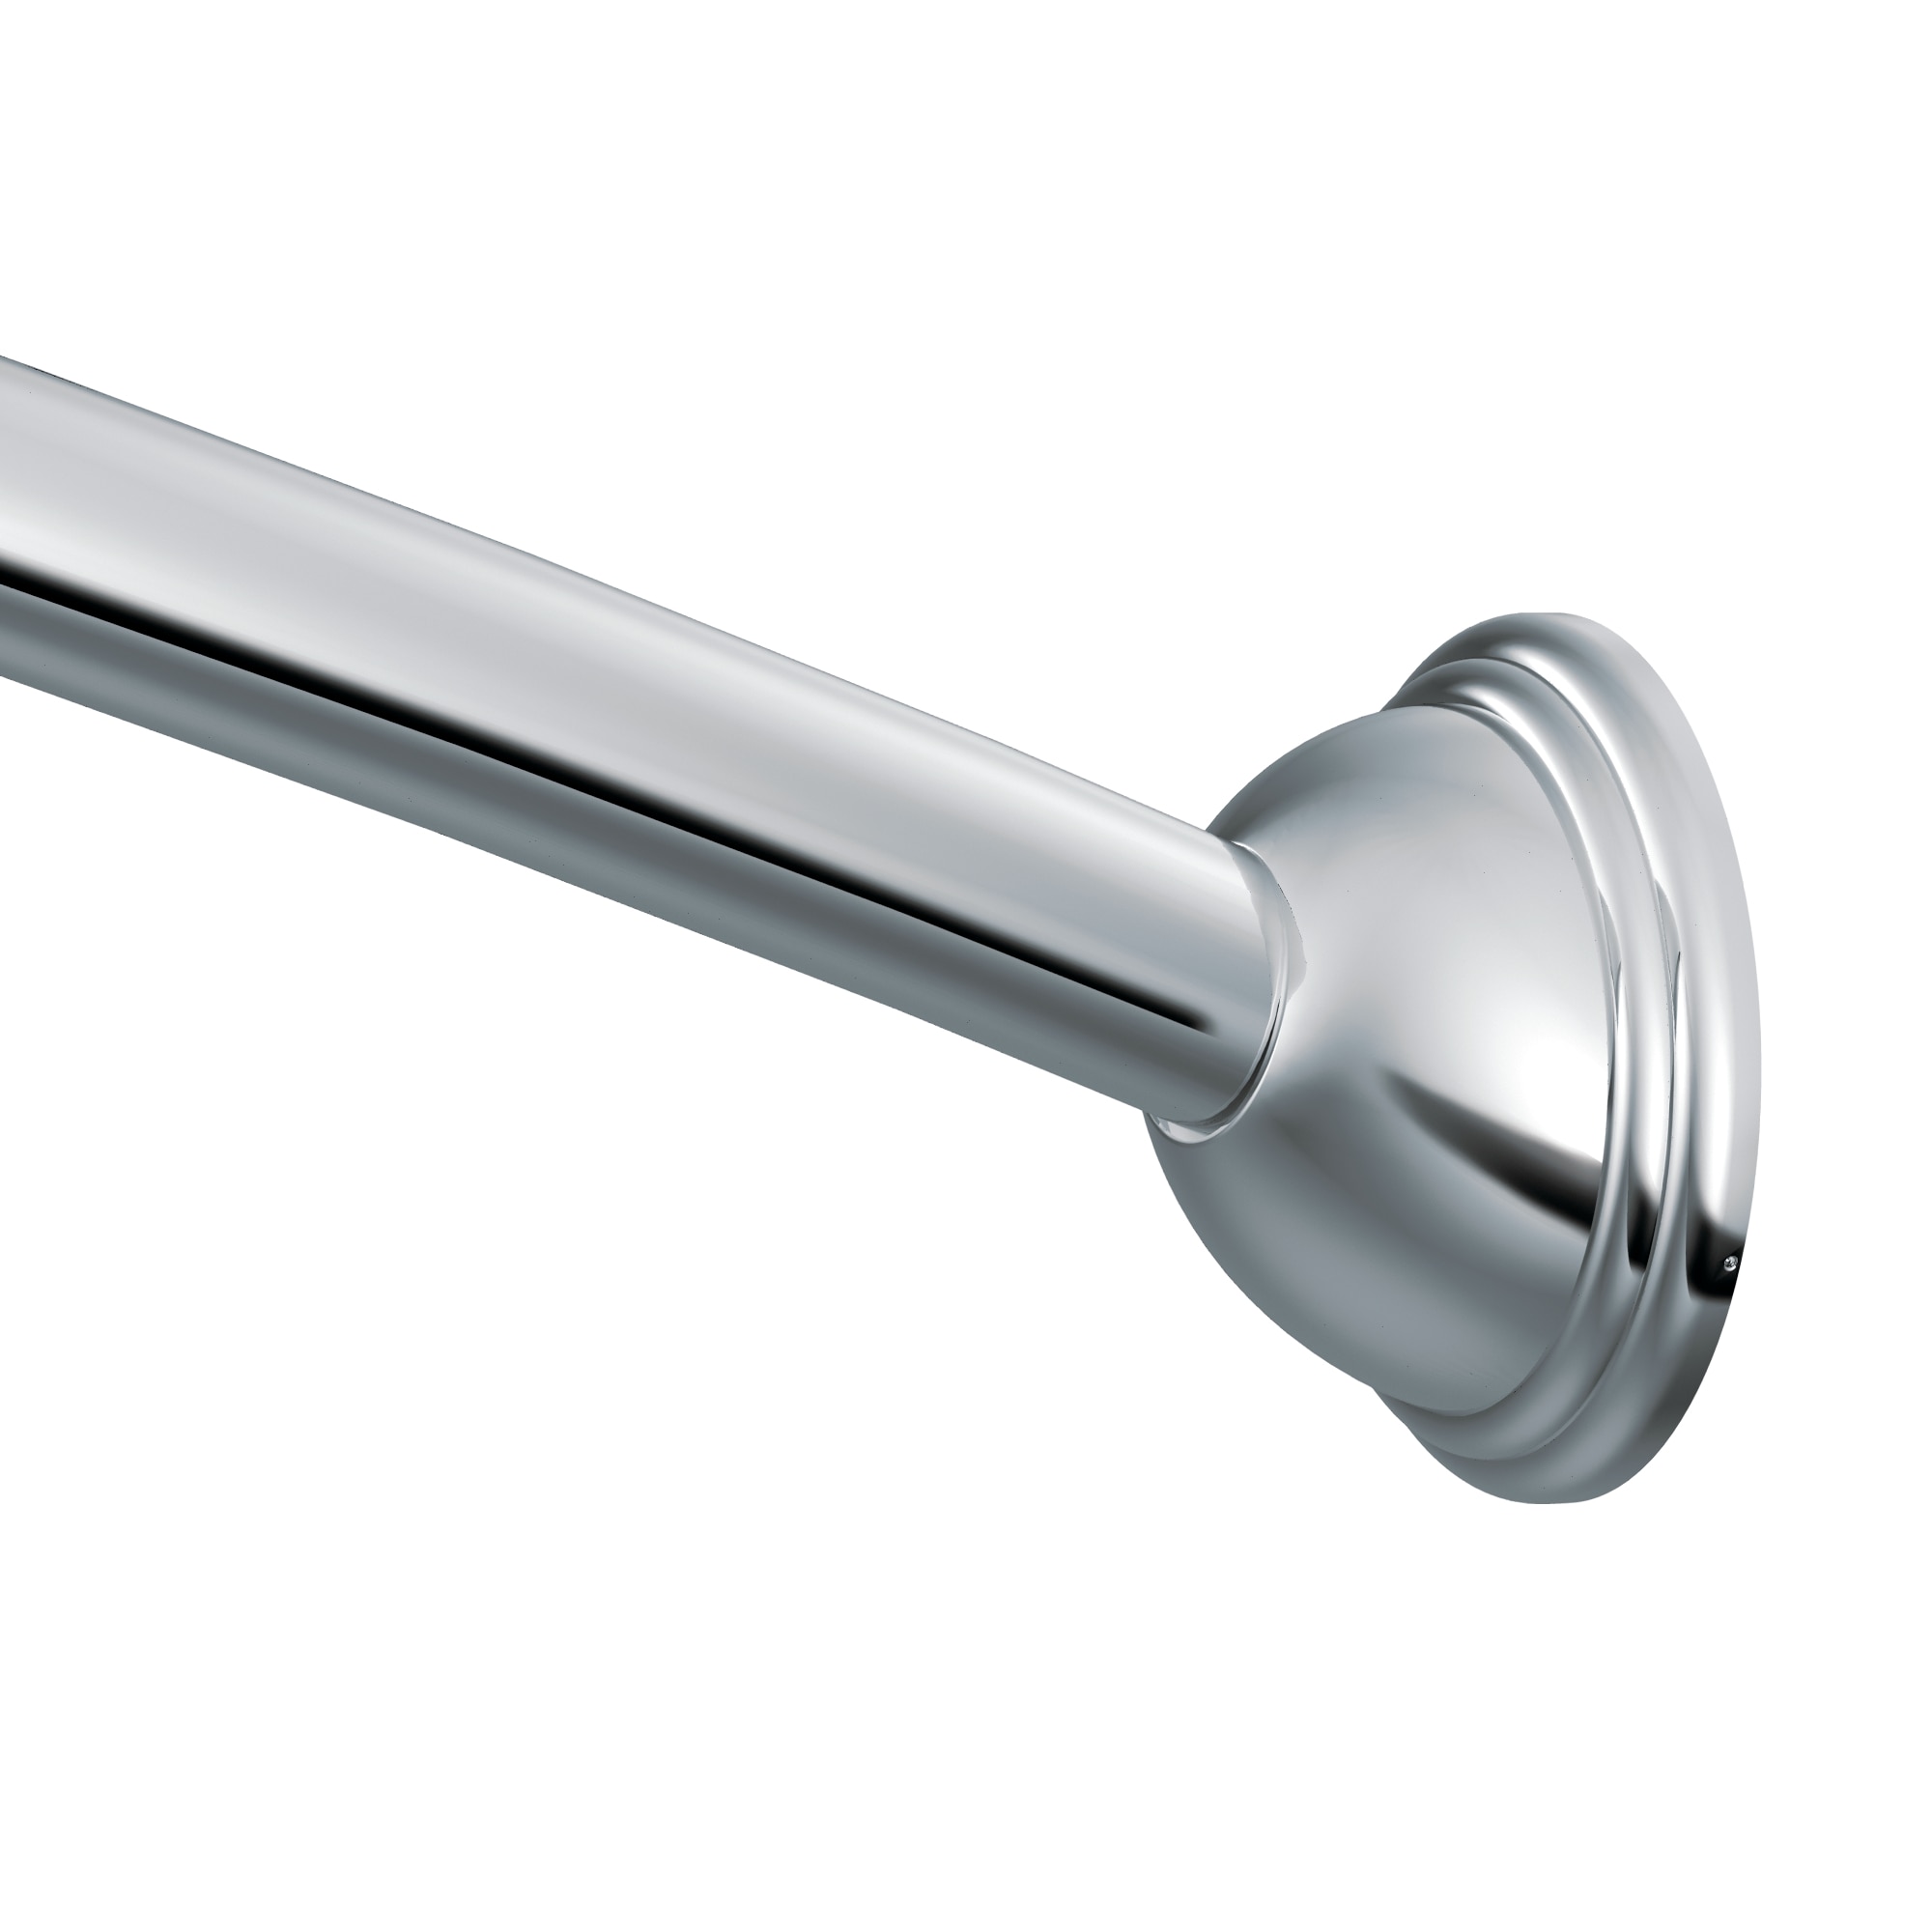 Shower Bath Tub Curtain Rod in Chrome Stainless Steel Fixed Mount 60 in x 1 in 